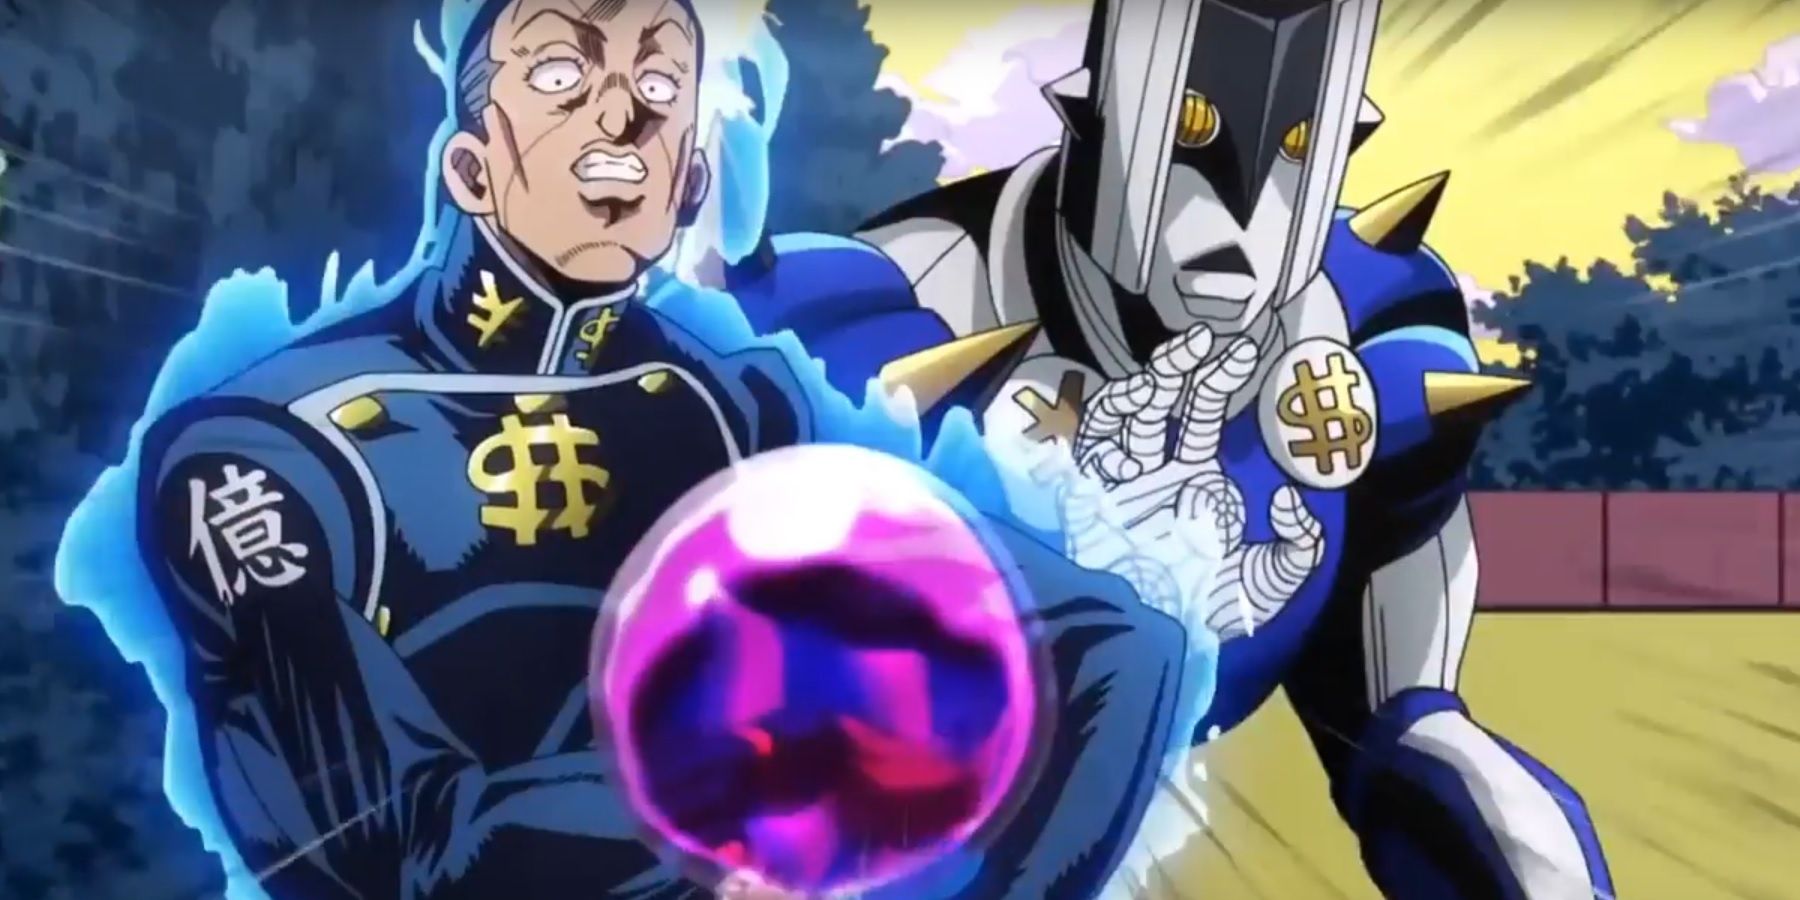 Okuyasu and his stand in JJBA.